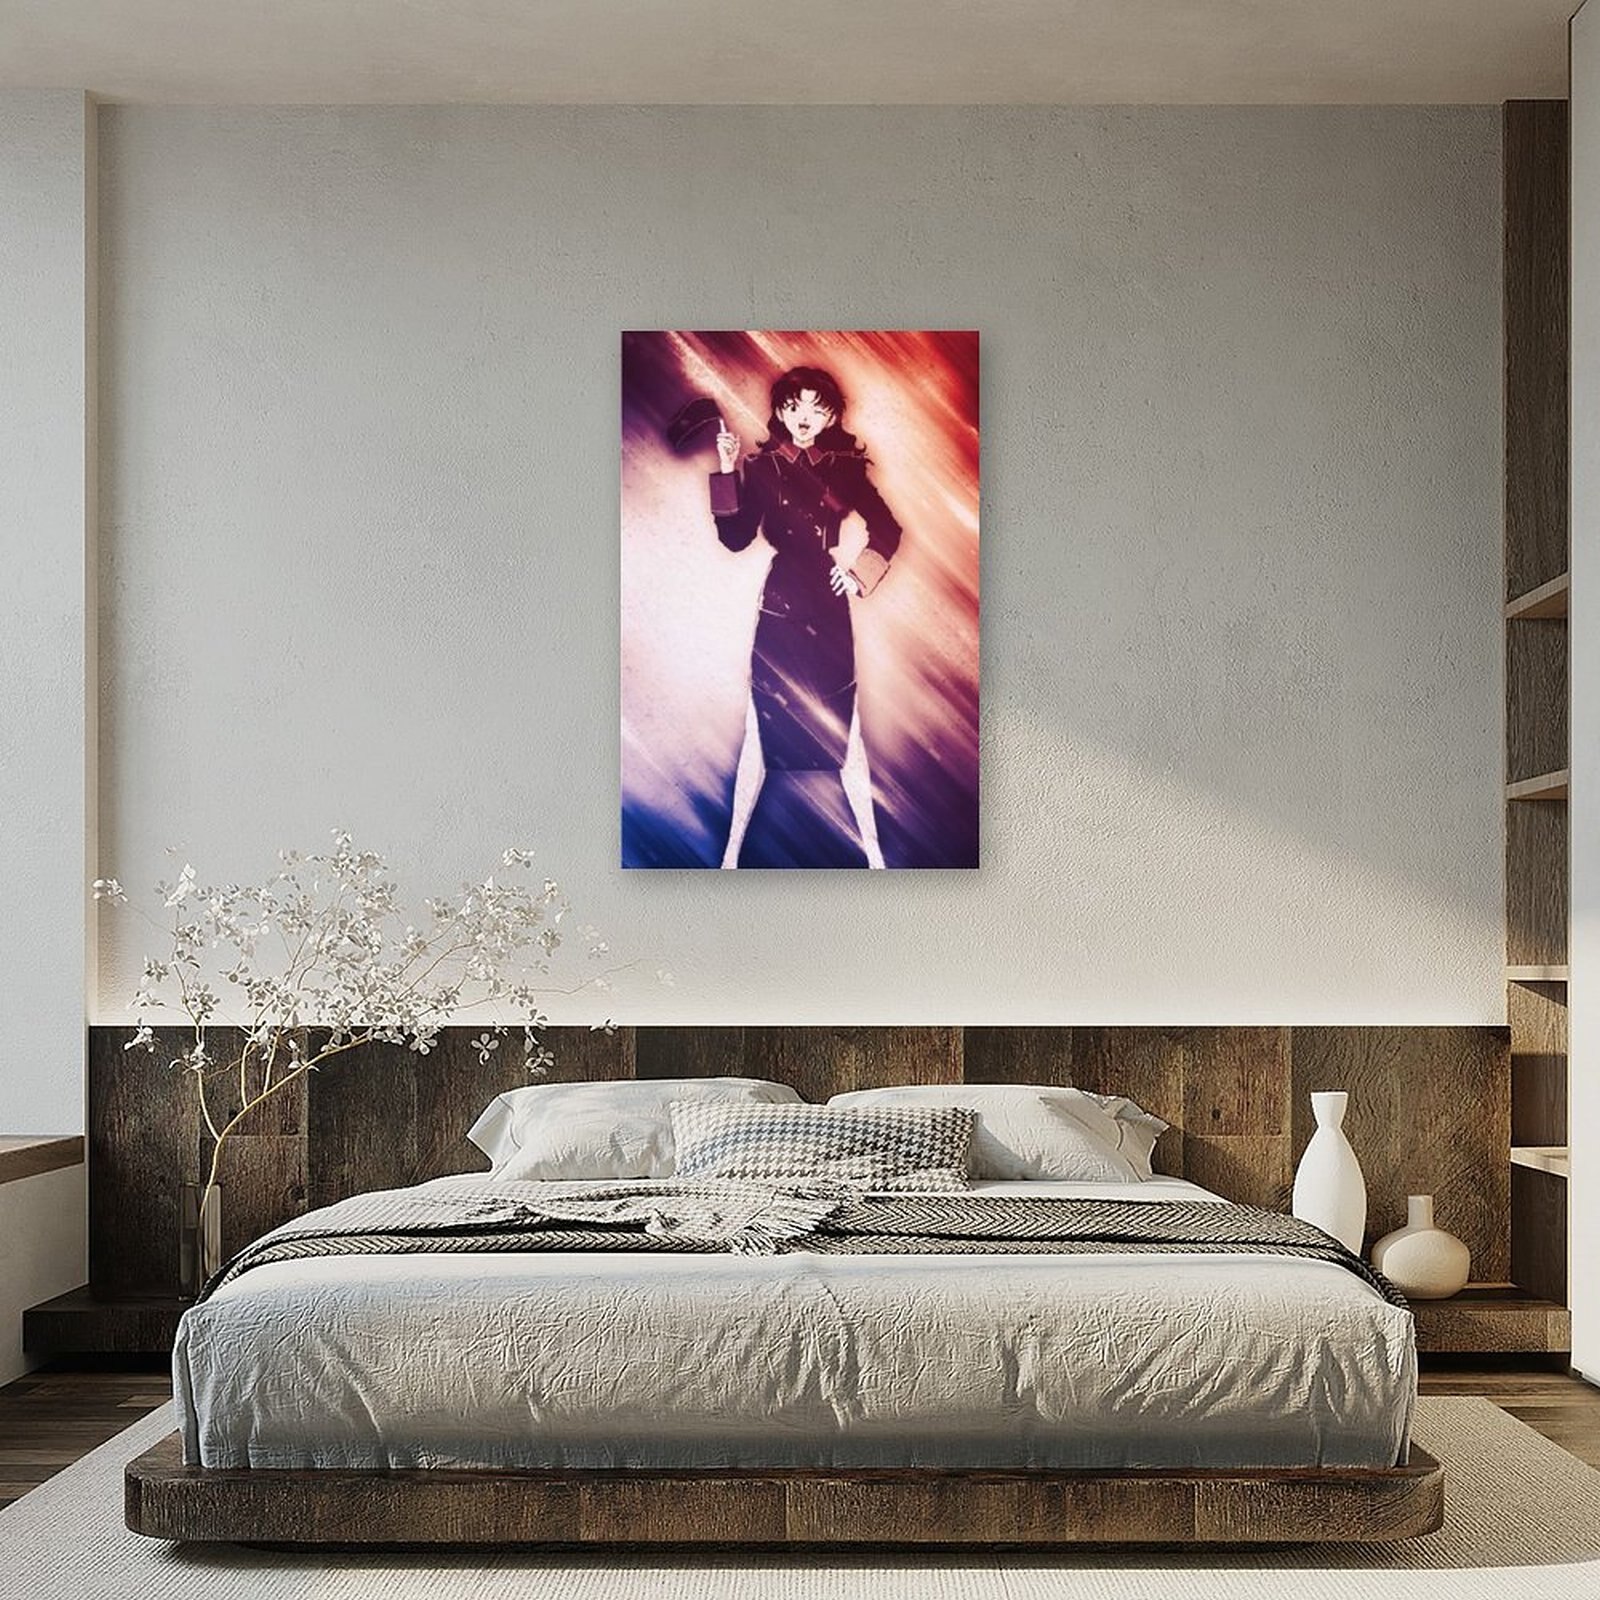 Anime Misato Evangelion GirlCanvas Painting Wall Art Posters and Prints Wall Pictures for Living Room Decoration 5 - Evangelion Shop